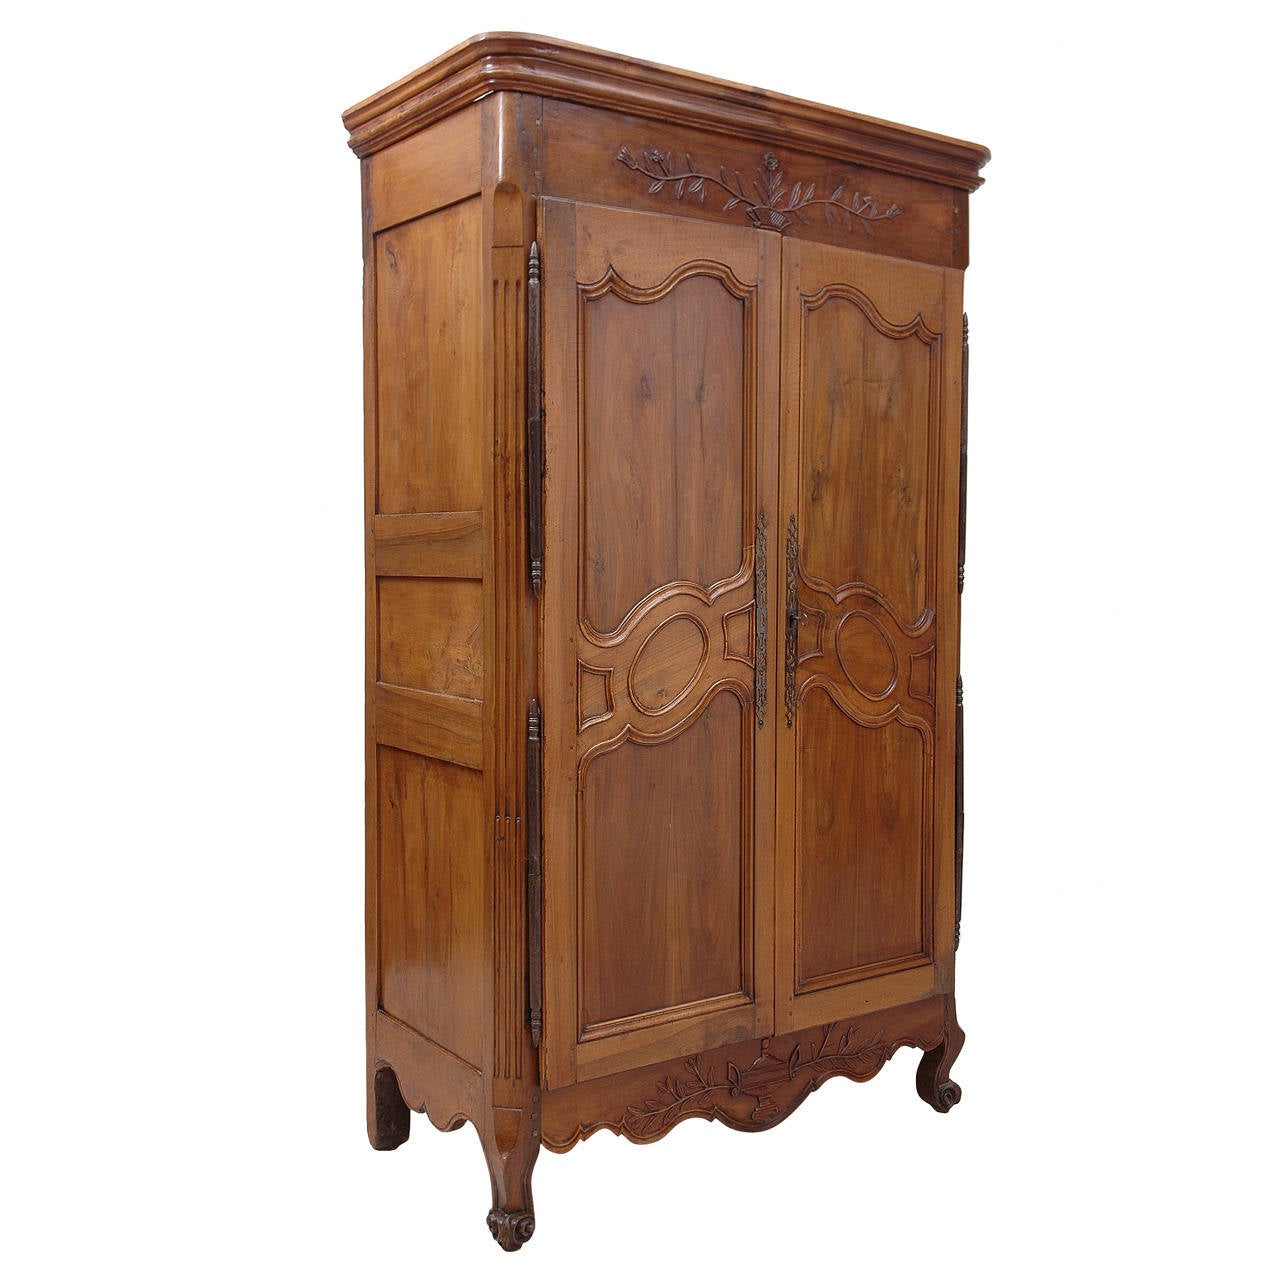 A French armoire in walnut from the late 1700s with carved foliage and urns in relief on the frieze and the bottom apron. More recent custom cabinetry in the interior offers sixteen clothing drawers ranging in depth from 3.5